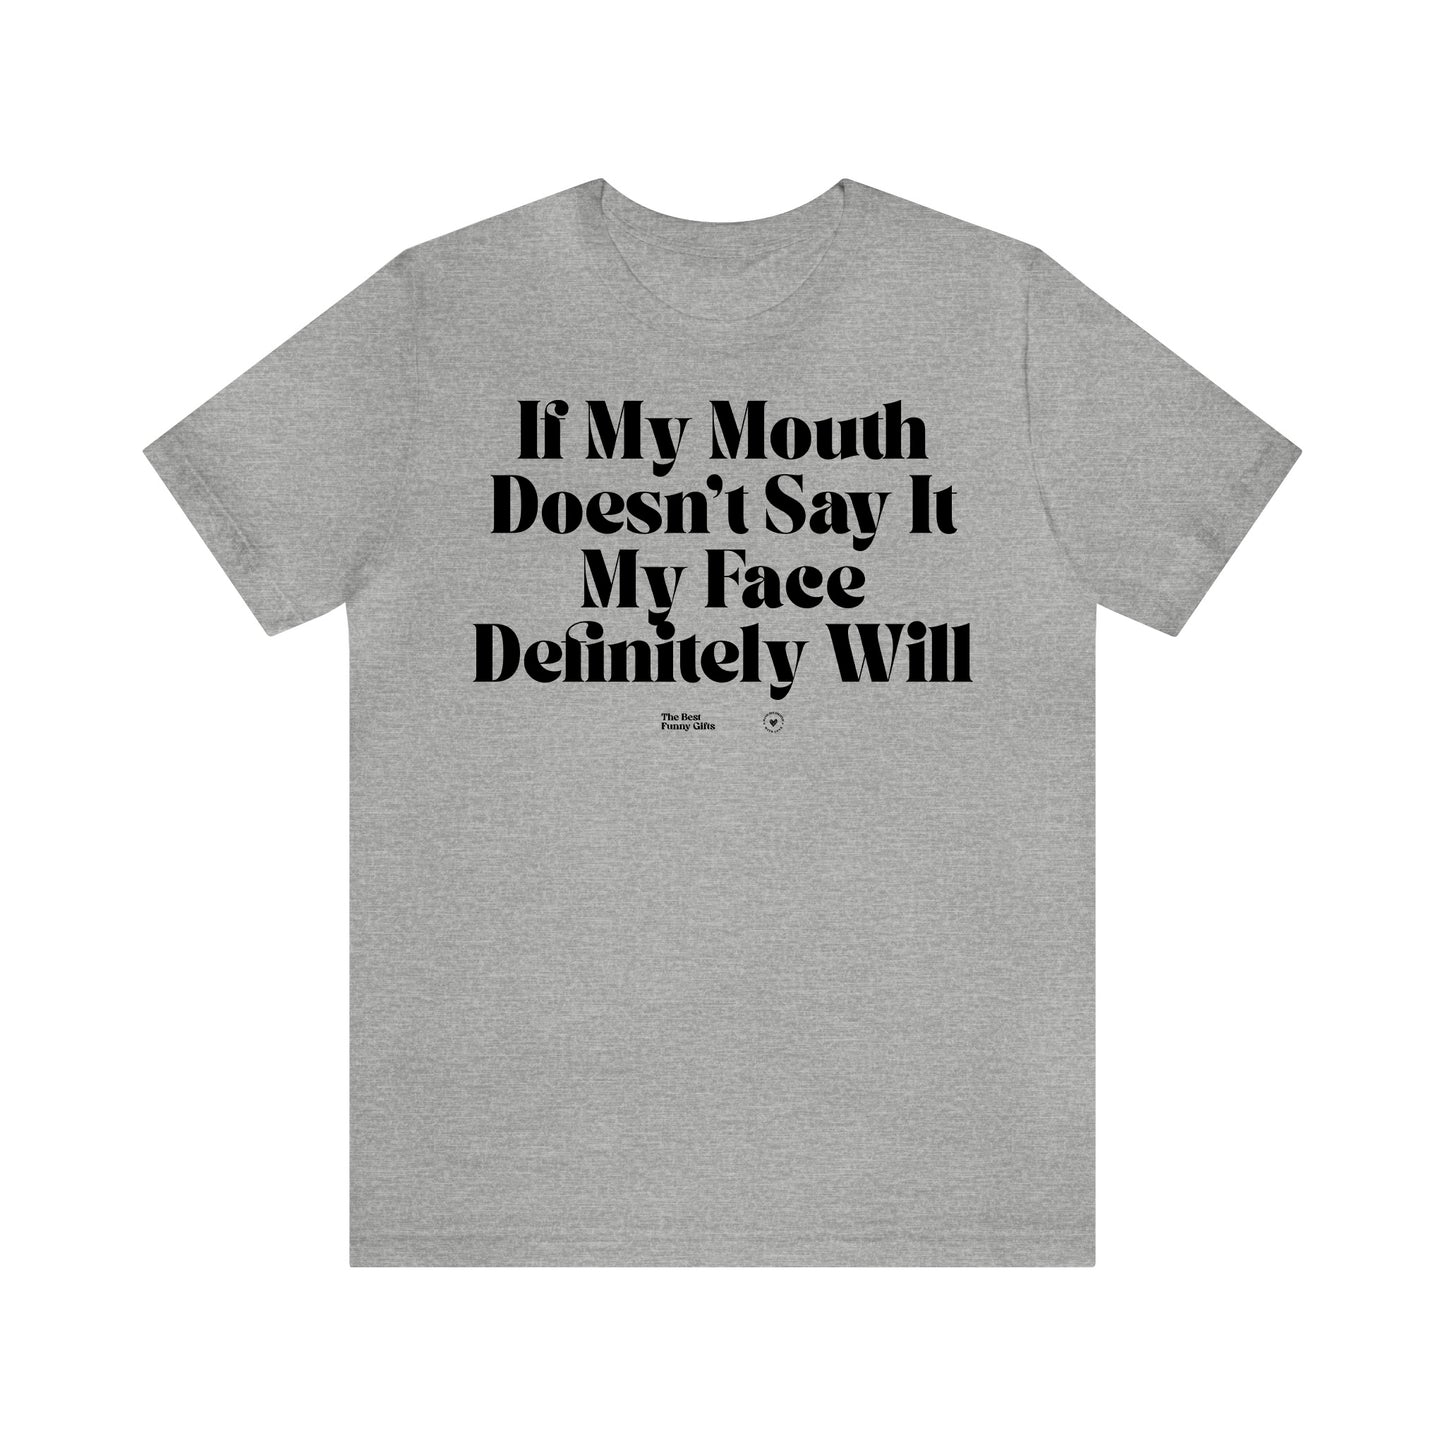 Funny Shirts for Women - If My Mouth Doesn't Say It My Face Definitely Will - Women’s T Shirts